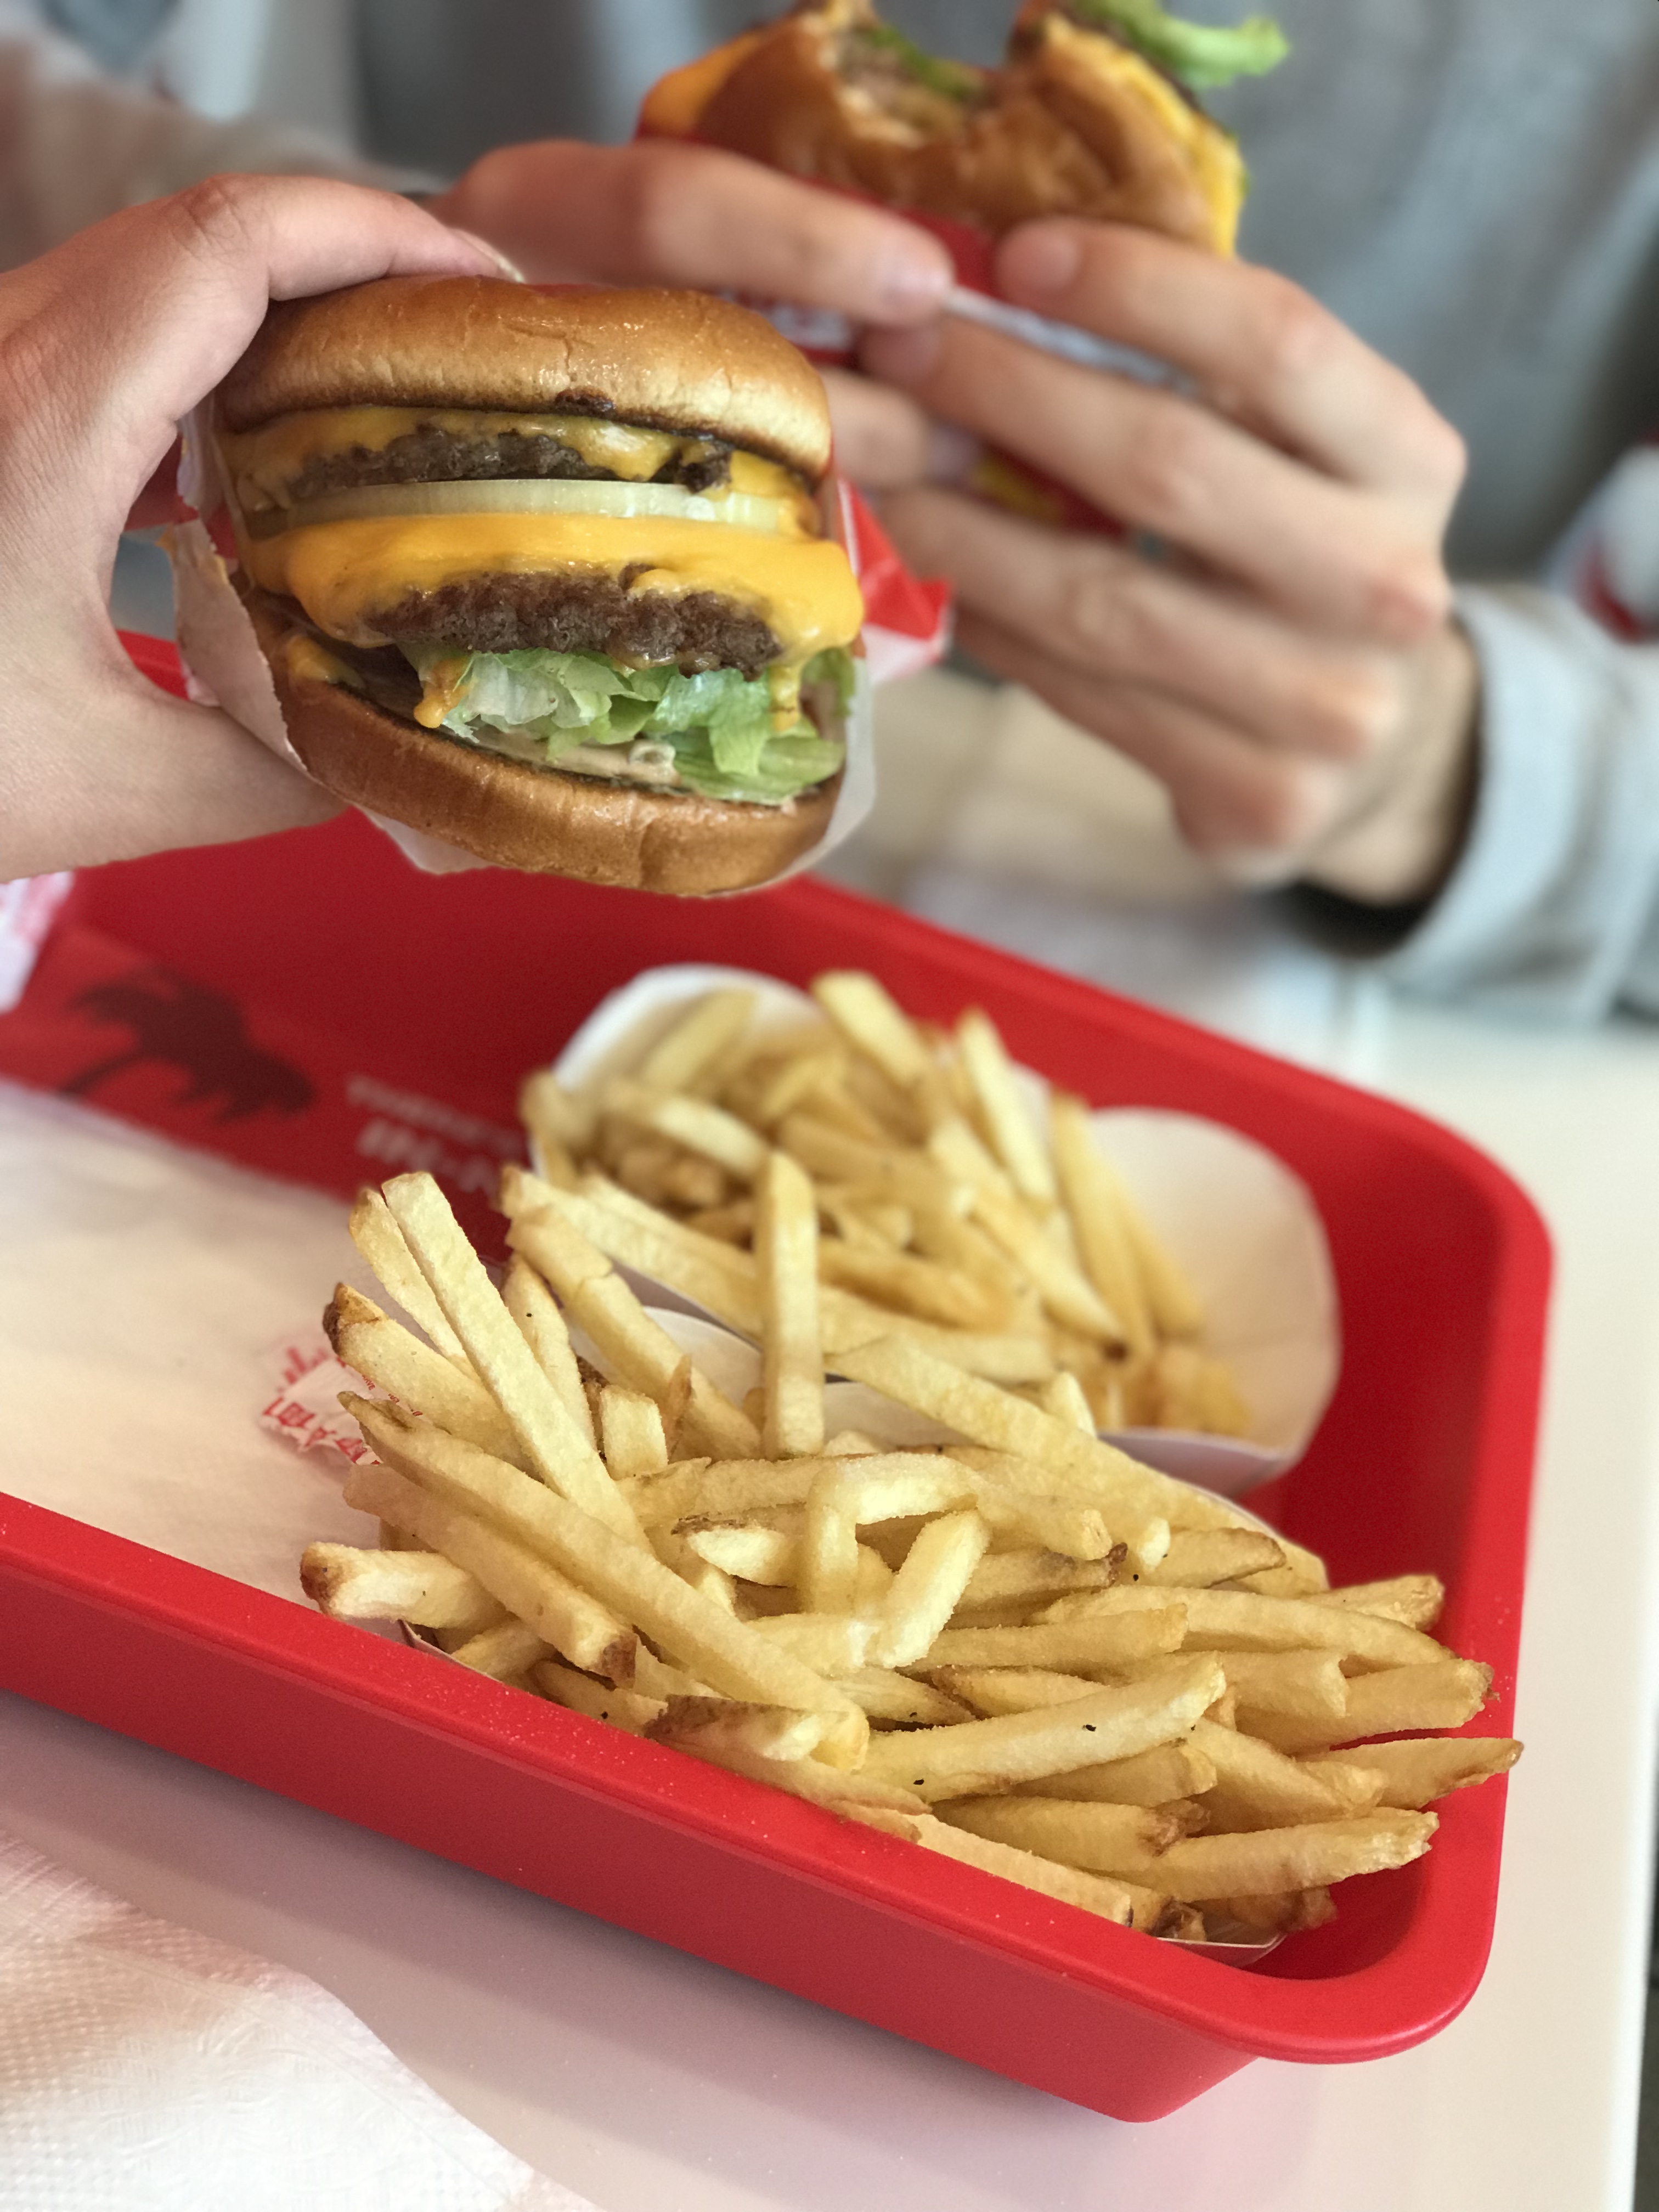 In-n-out San Francisco